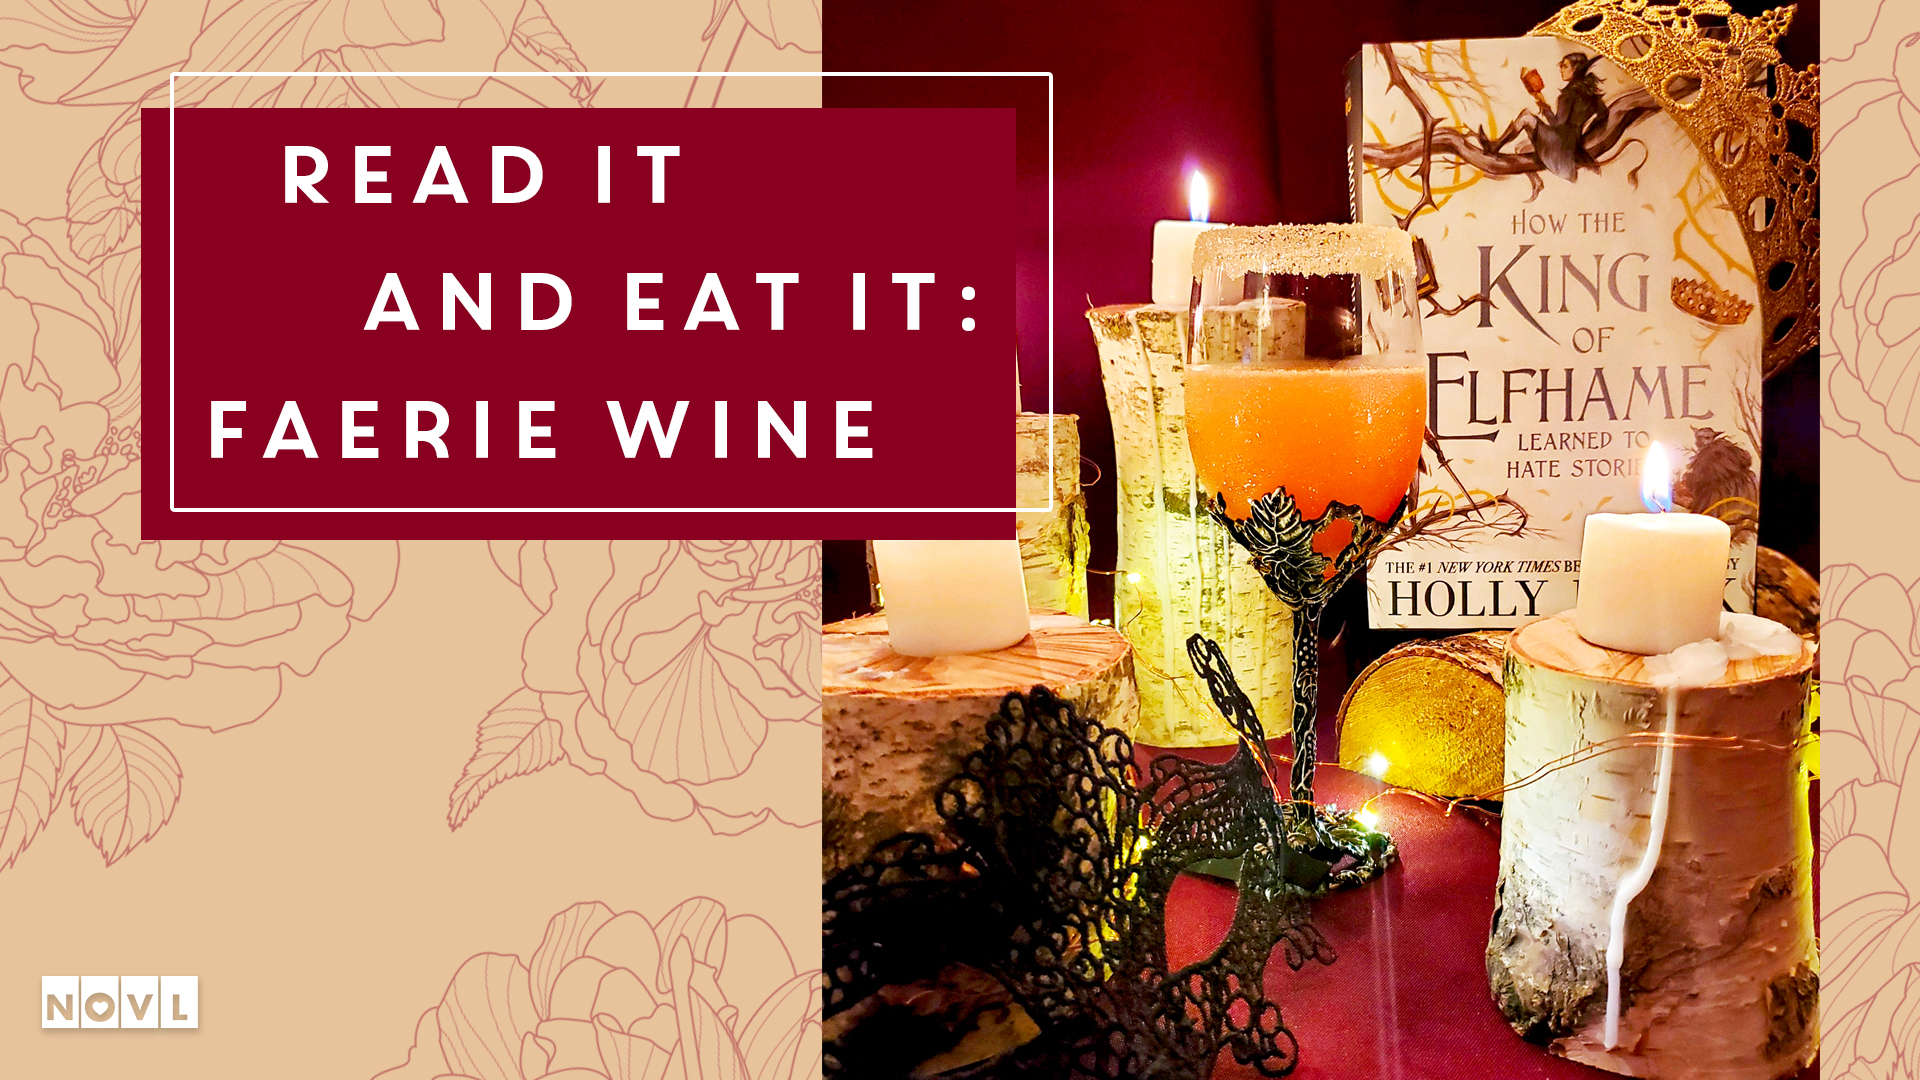 The NOVL Blog, Featured Image for Article: Read It and Eat It: Faerie Wine